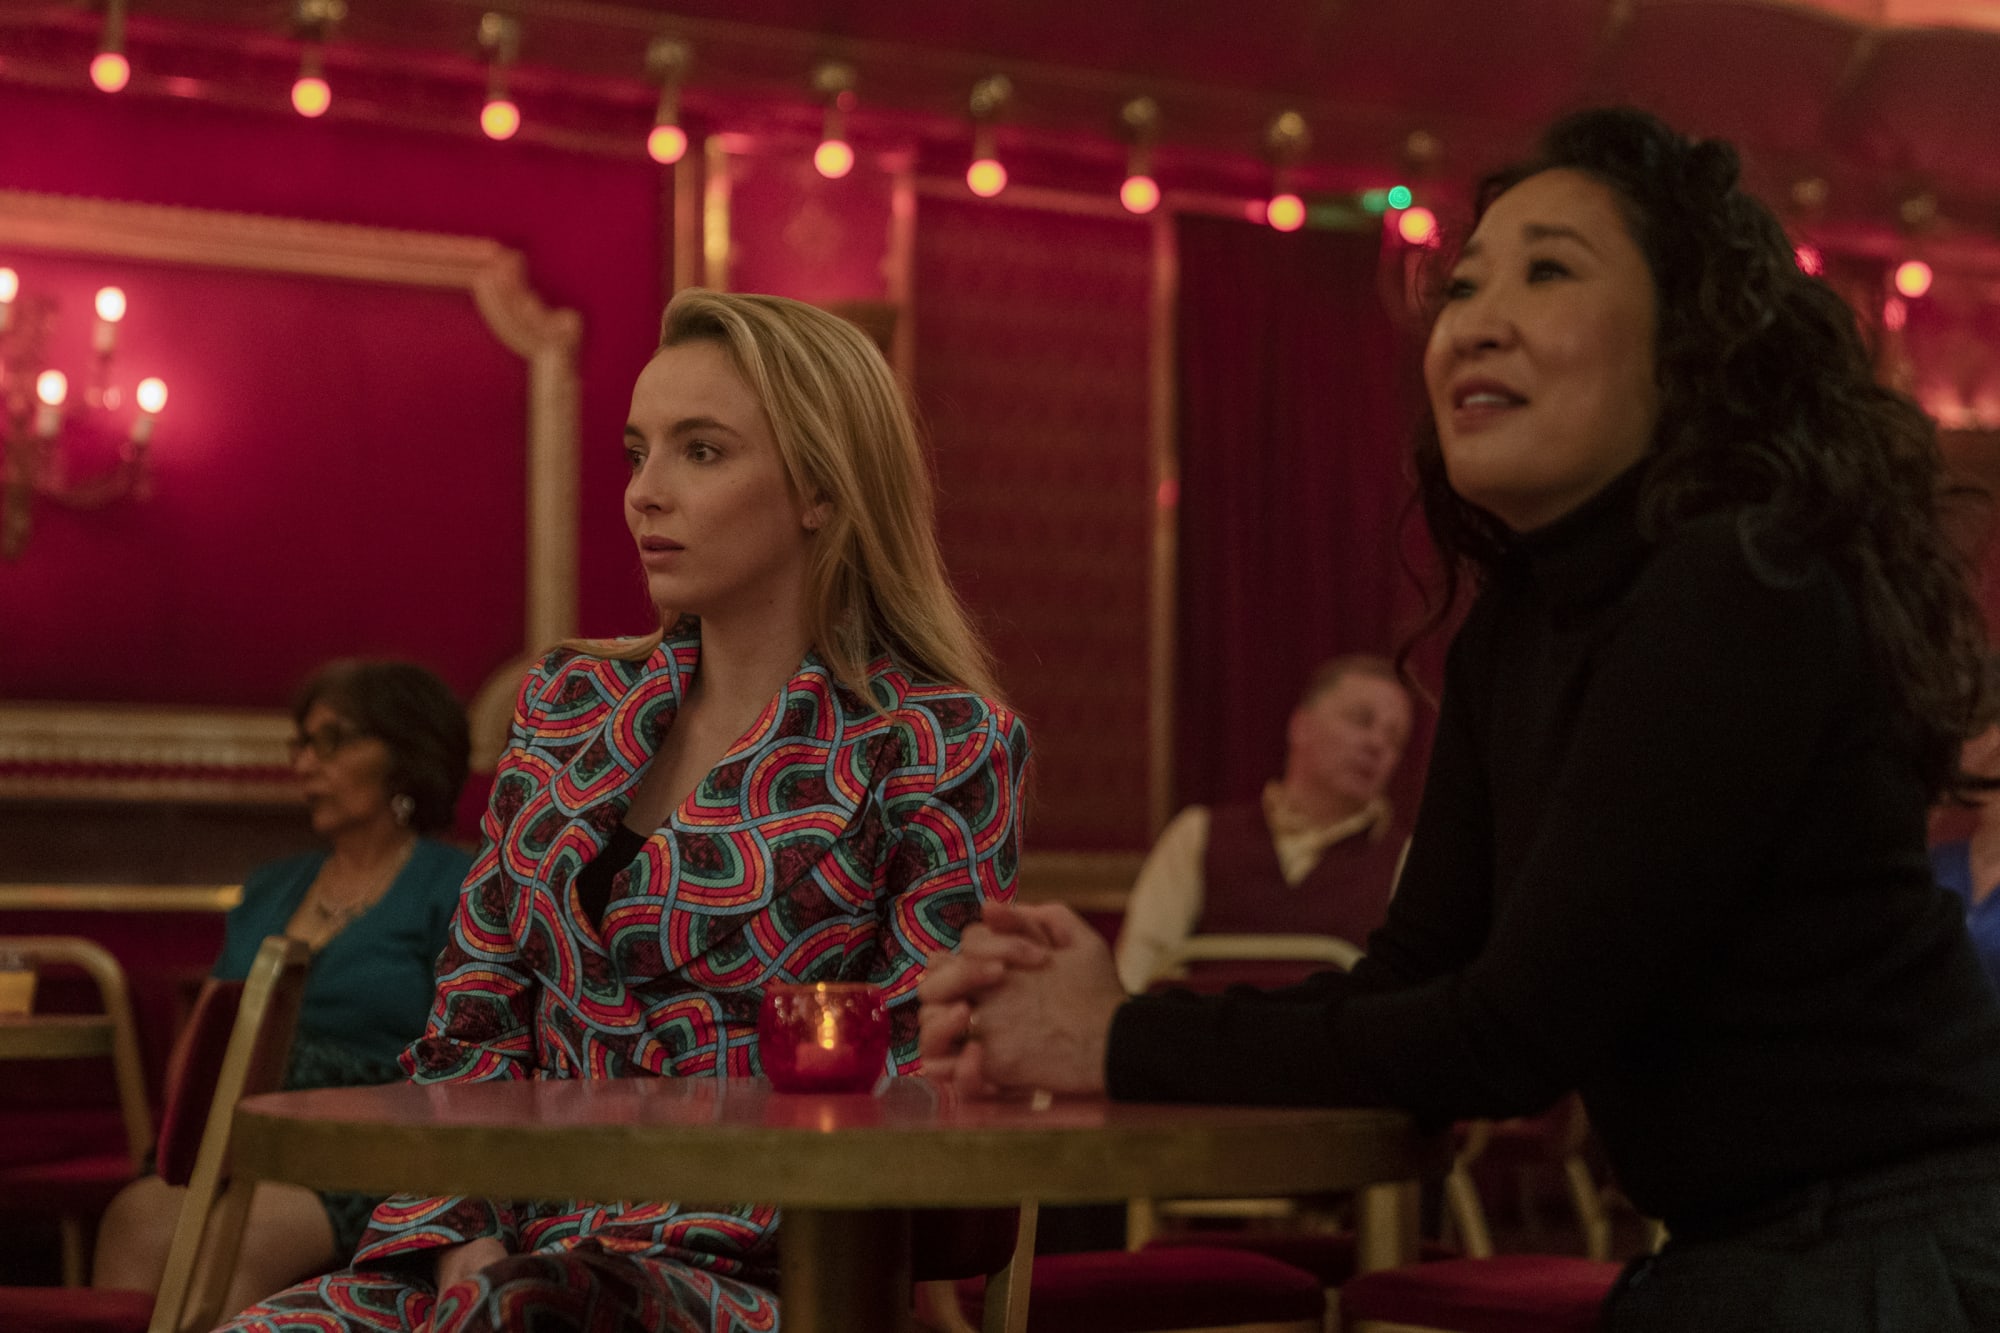 Dvd Releases This Week Killing Eve Season 4 And More